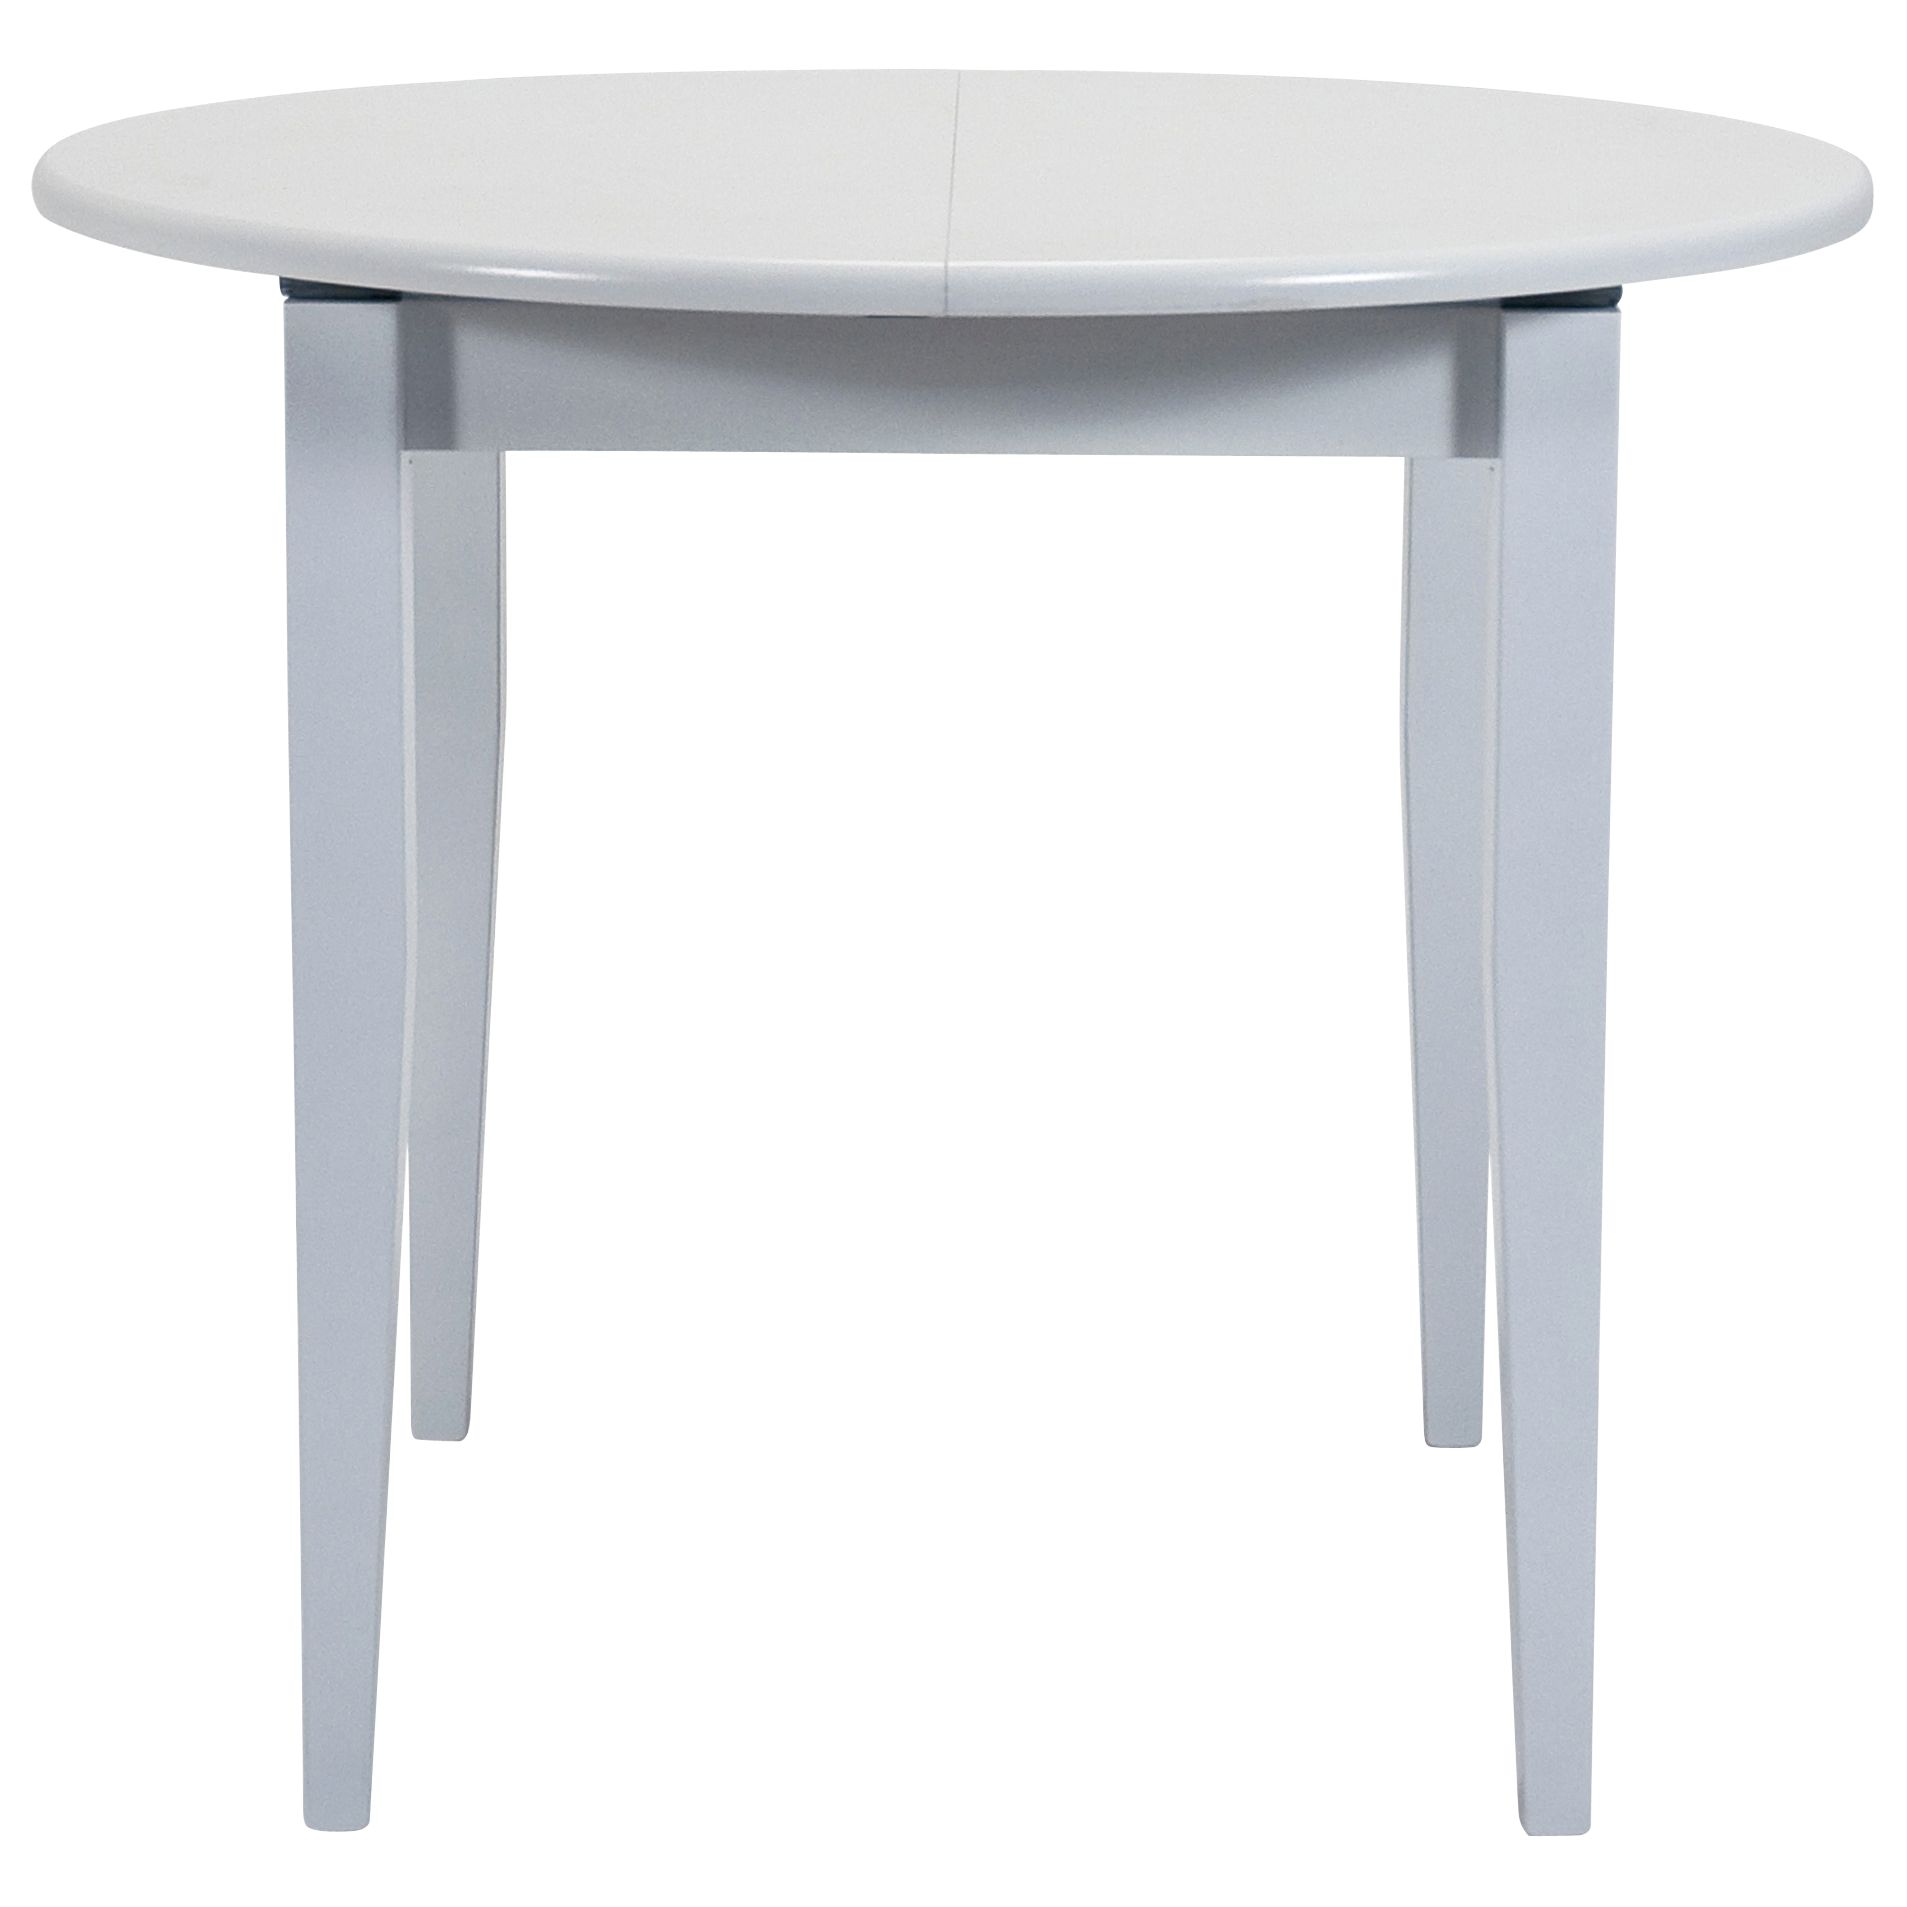 John Lewis Lacock Round Extending Dining Table,